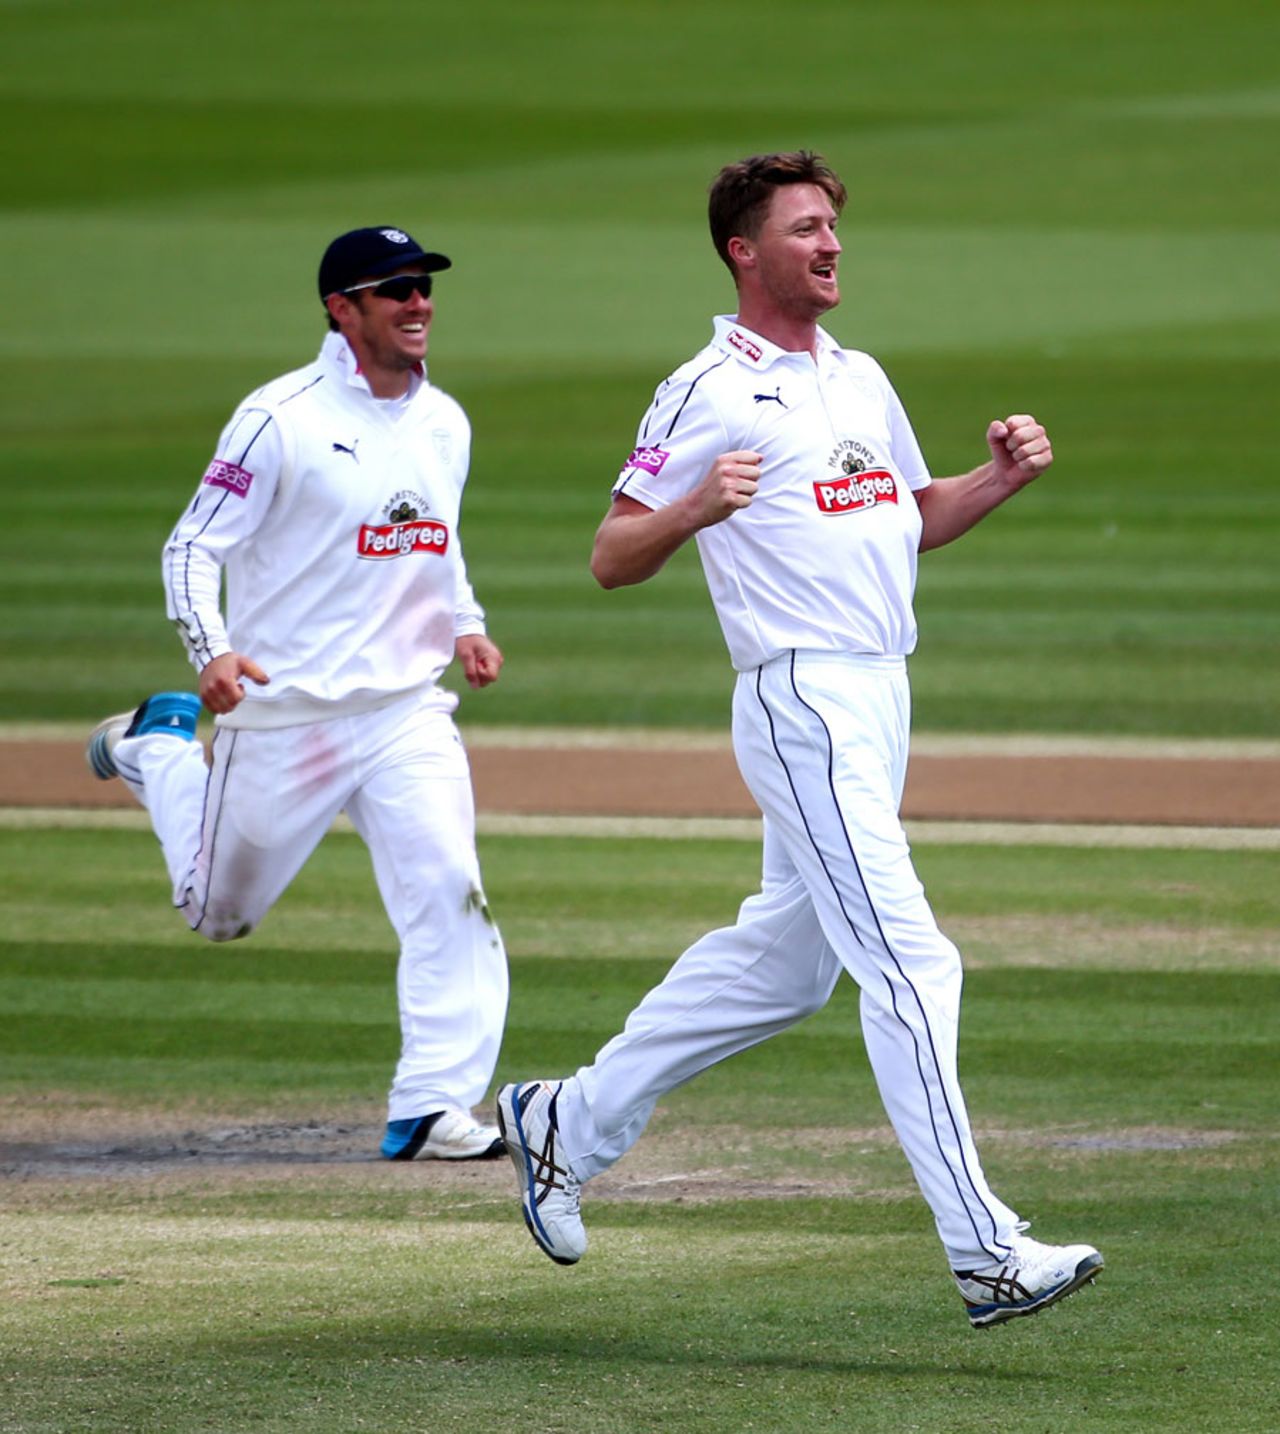 Jackson Bird took two wickets to help finish off the second innings, Sussex v Hampshire, County Championship, Division One, Hove, 3rd day, June 9, 2015